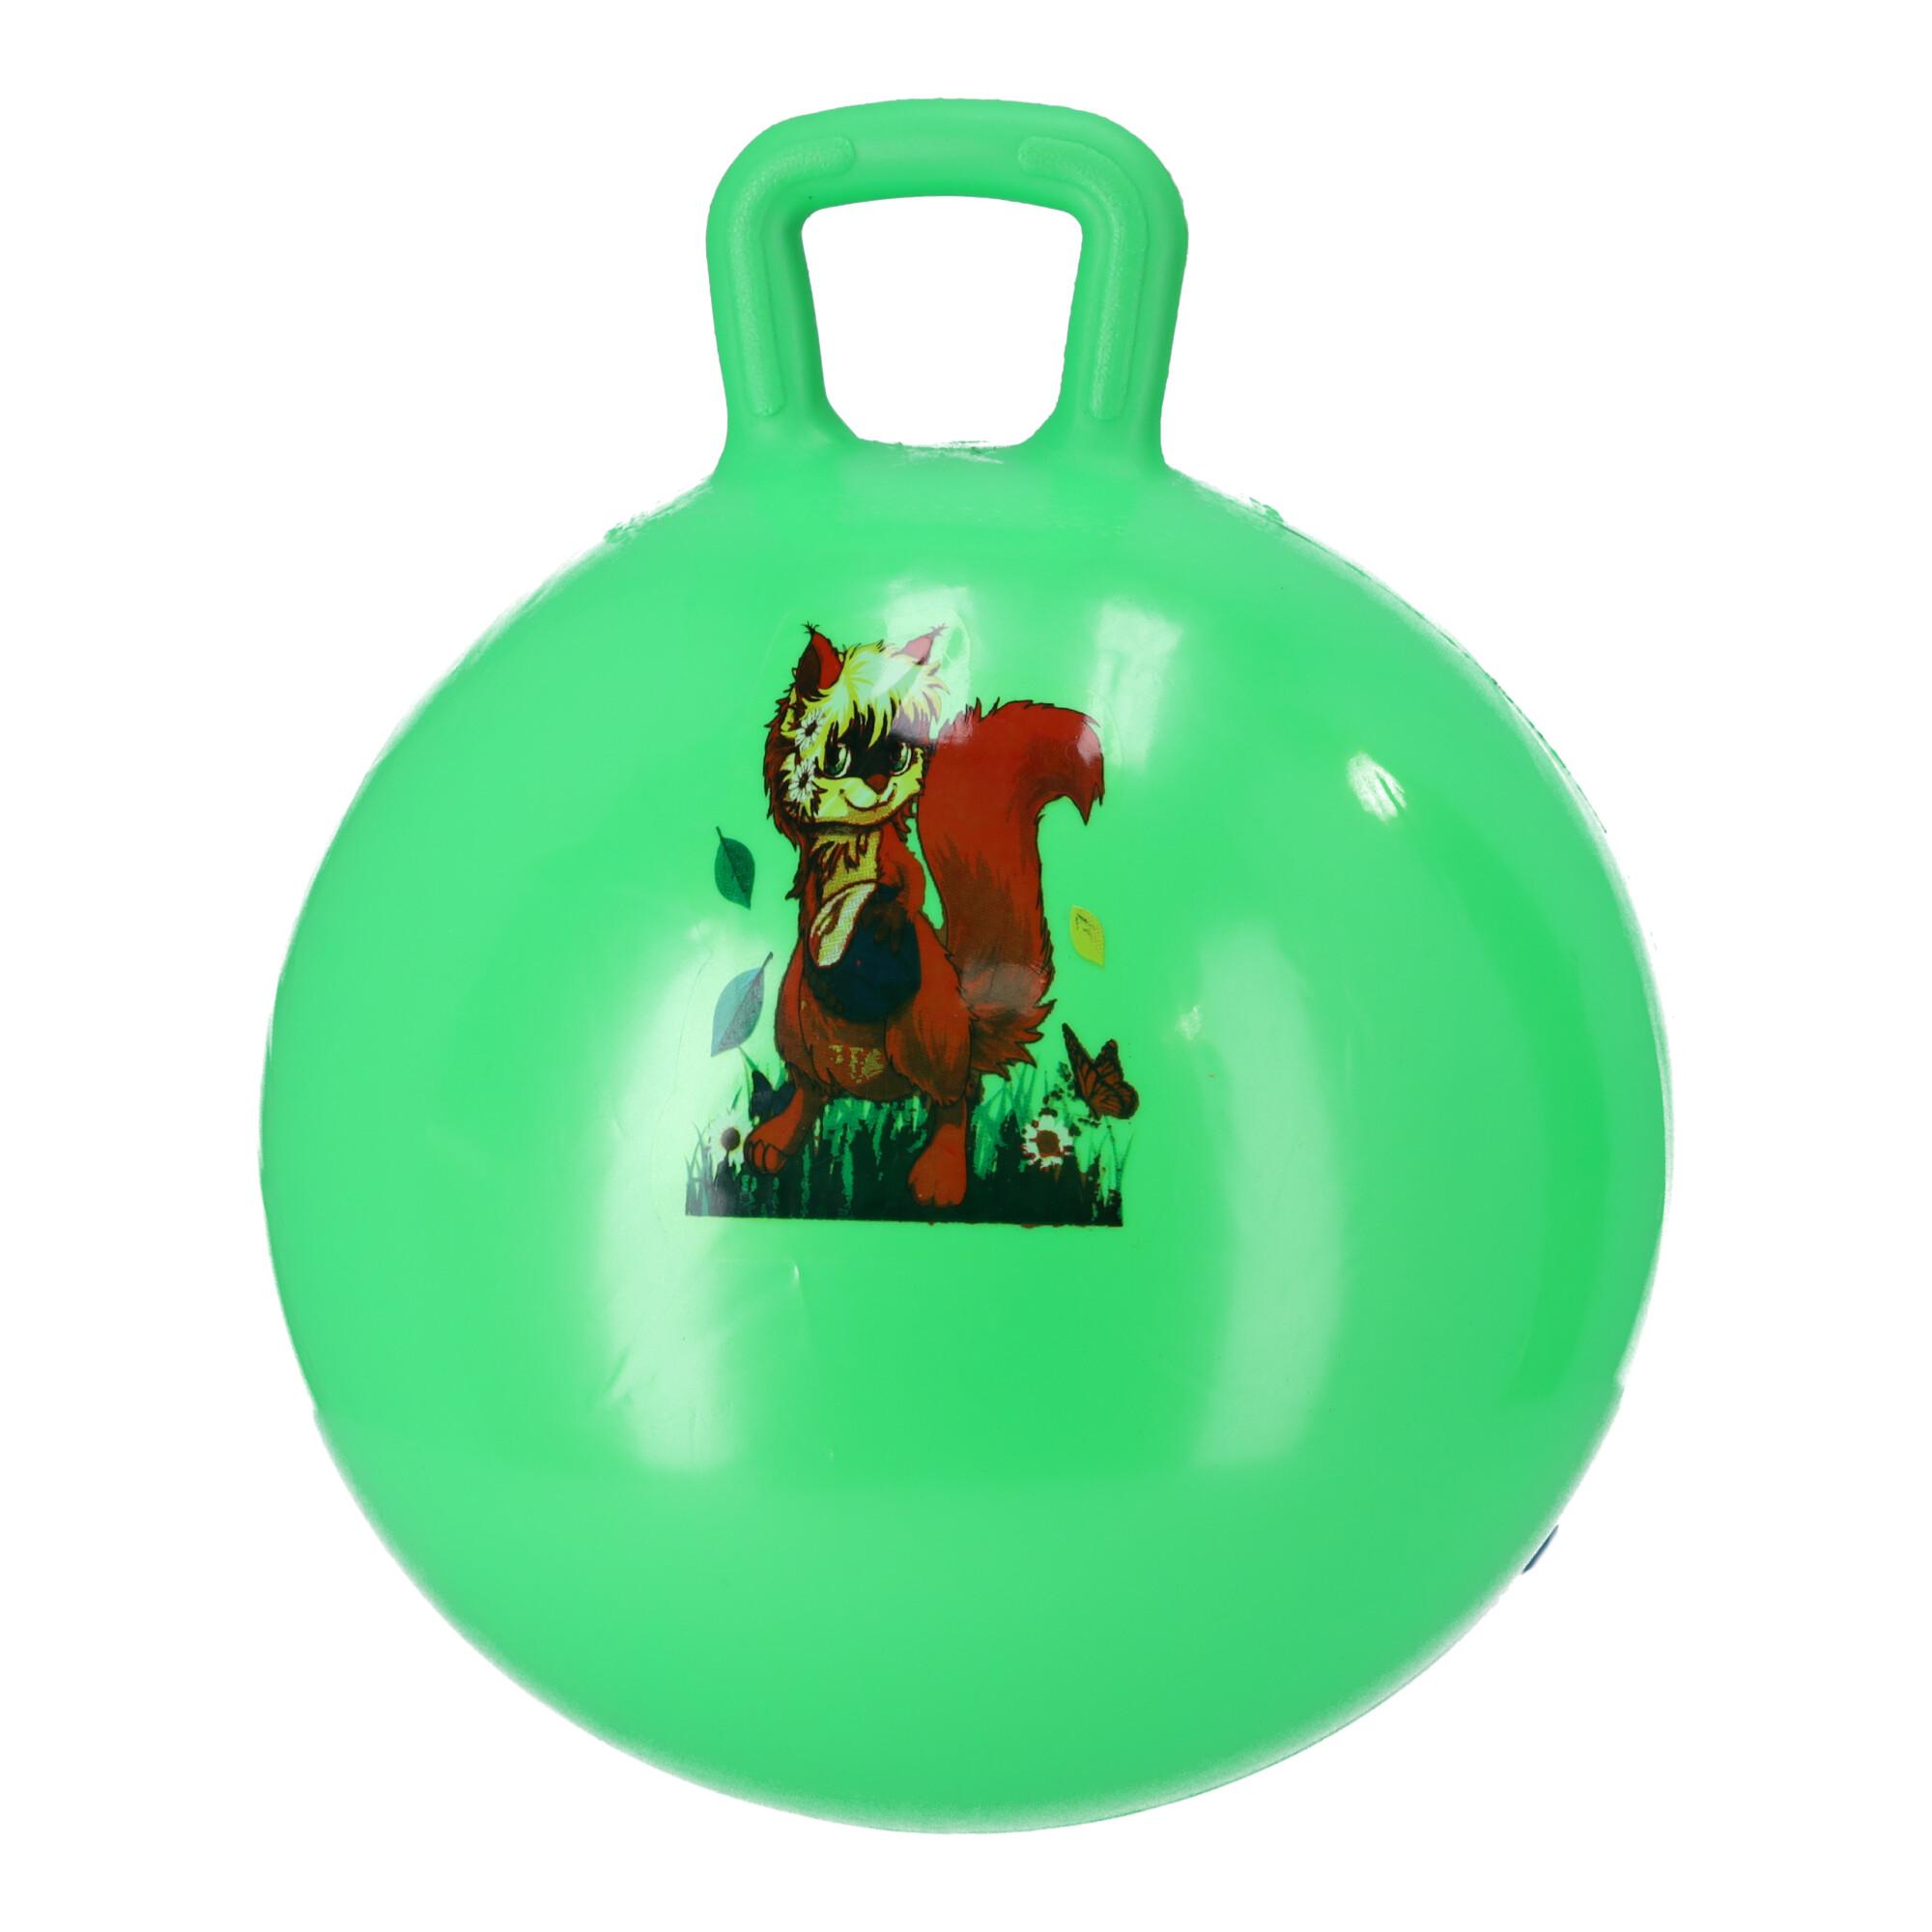 Jumping ball, jumper for children with handles - green